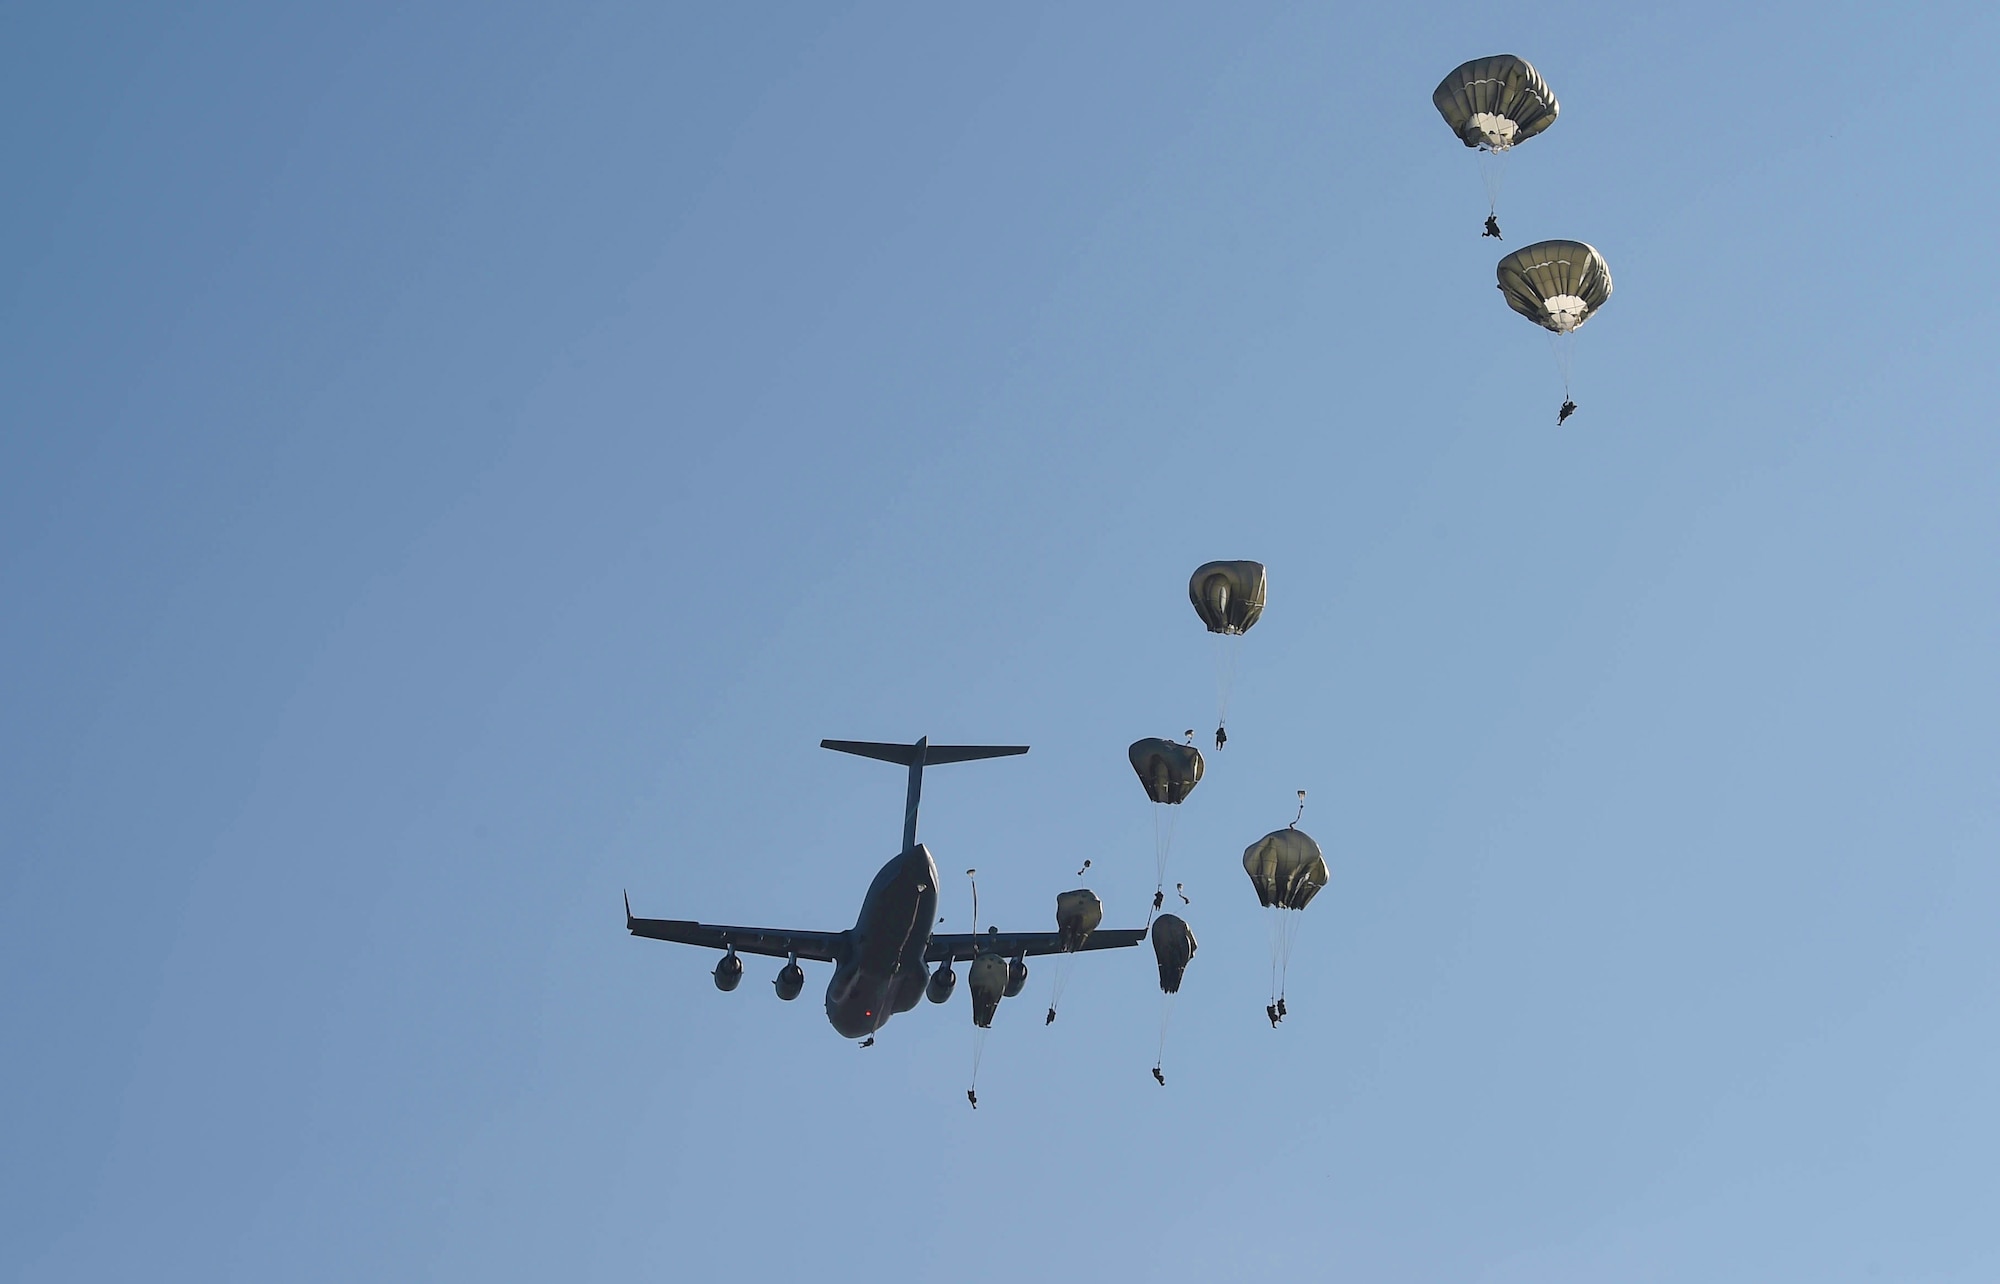 Paratroopers from the 82nd Airborne Division jump from a C-17 Globemaster III from McChord Field, Wash., during Exercise Predictable Iron at Pope Field, N.C., Aug 23, 2018. Airmen from the 62nd Airlift Wing worked alongside the Army to drop equipment and personnel during the exercise. (U.S. Air Force photo by Senior Airman Tryphena Mayhugh)